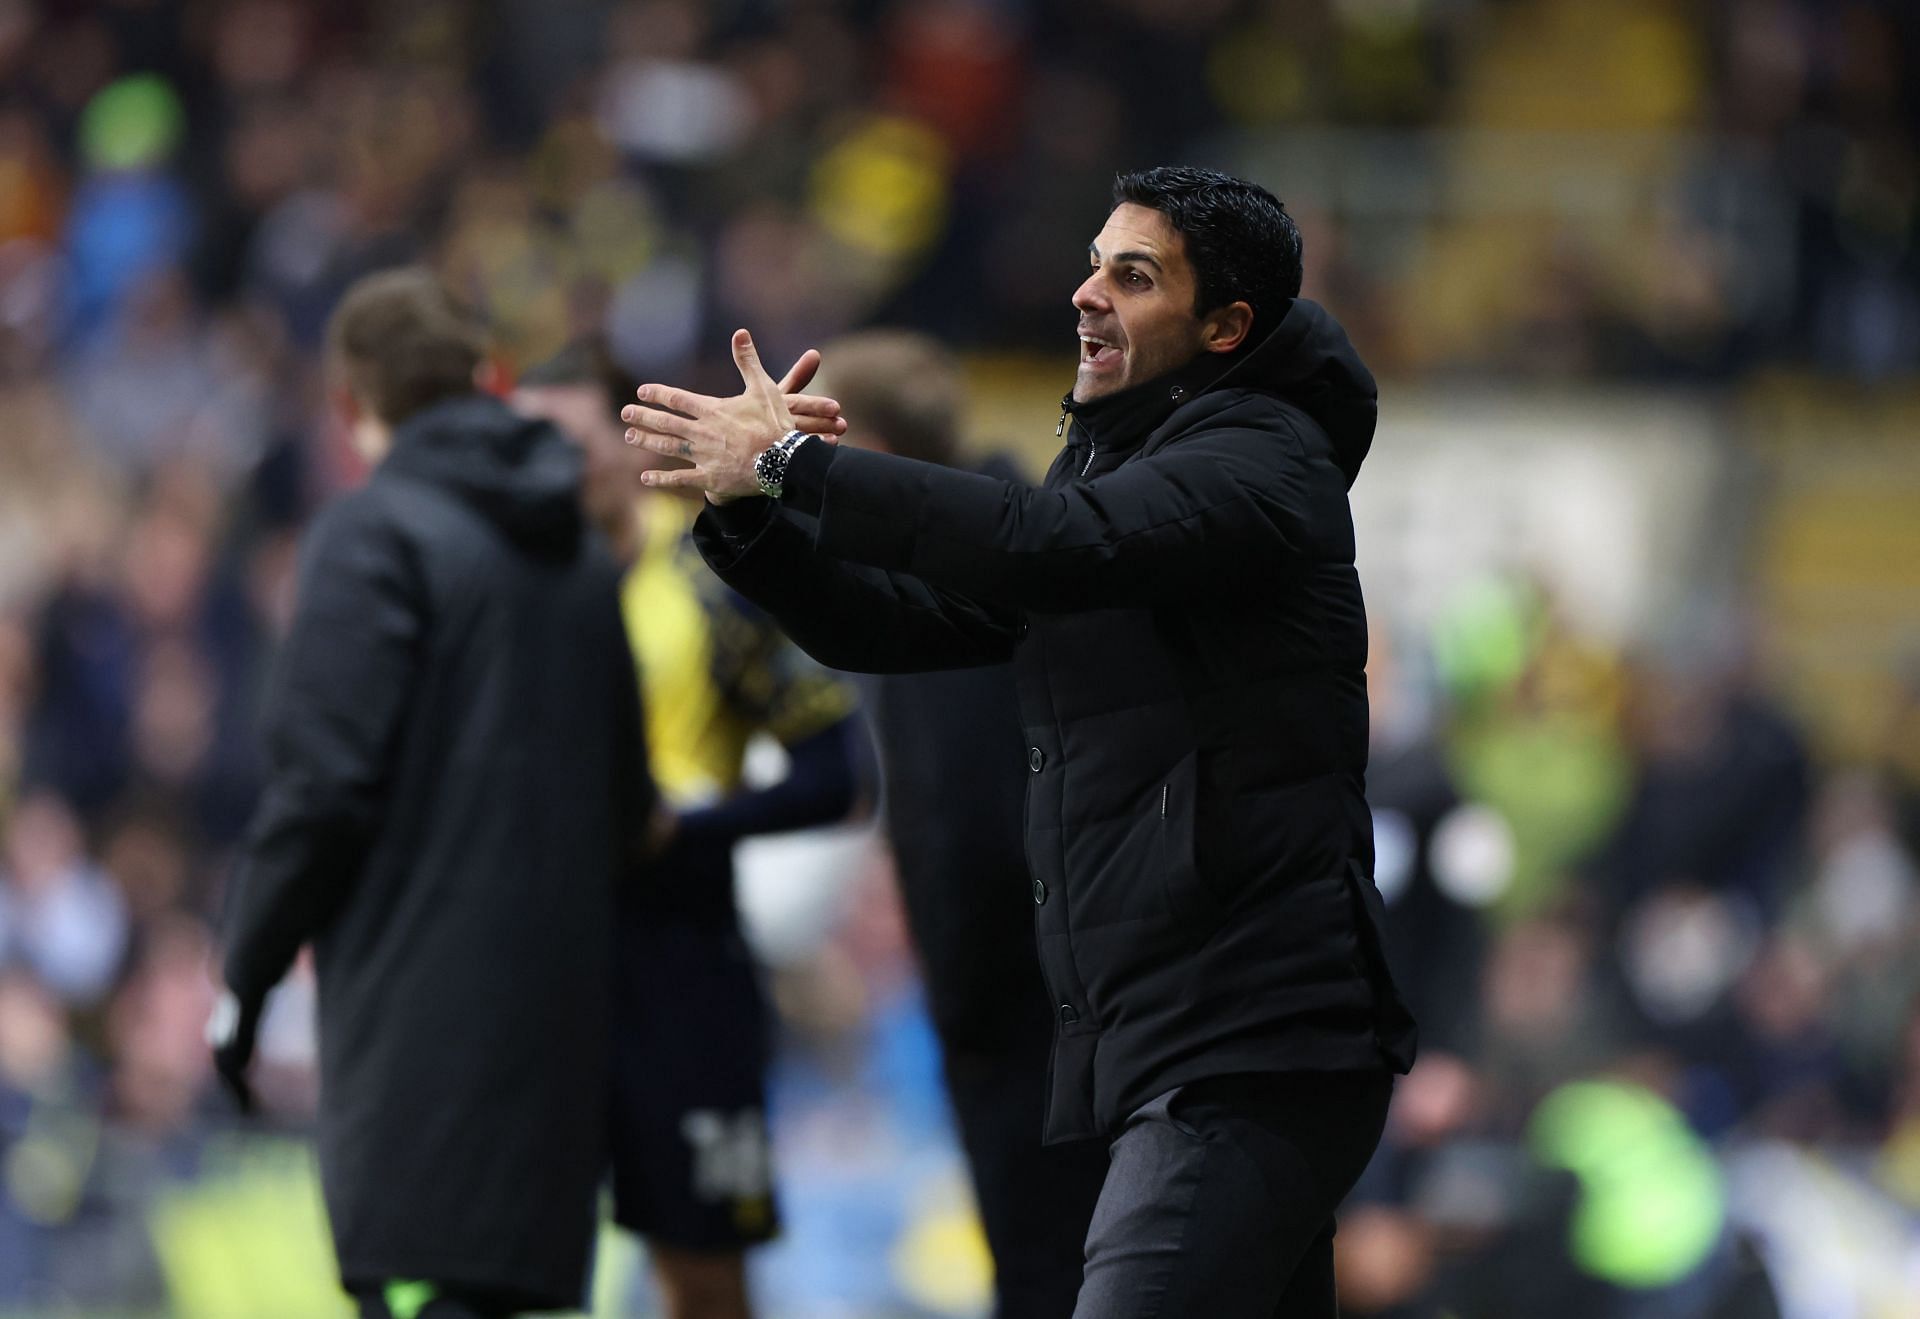 Arsenal manager Mikel Arteta instructing vs Oxford United: Emirates FA Cup Third Round